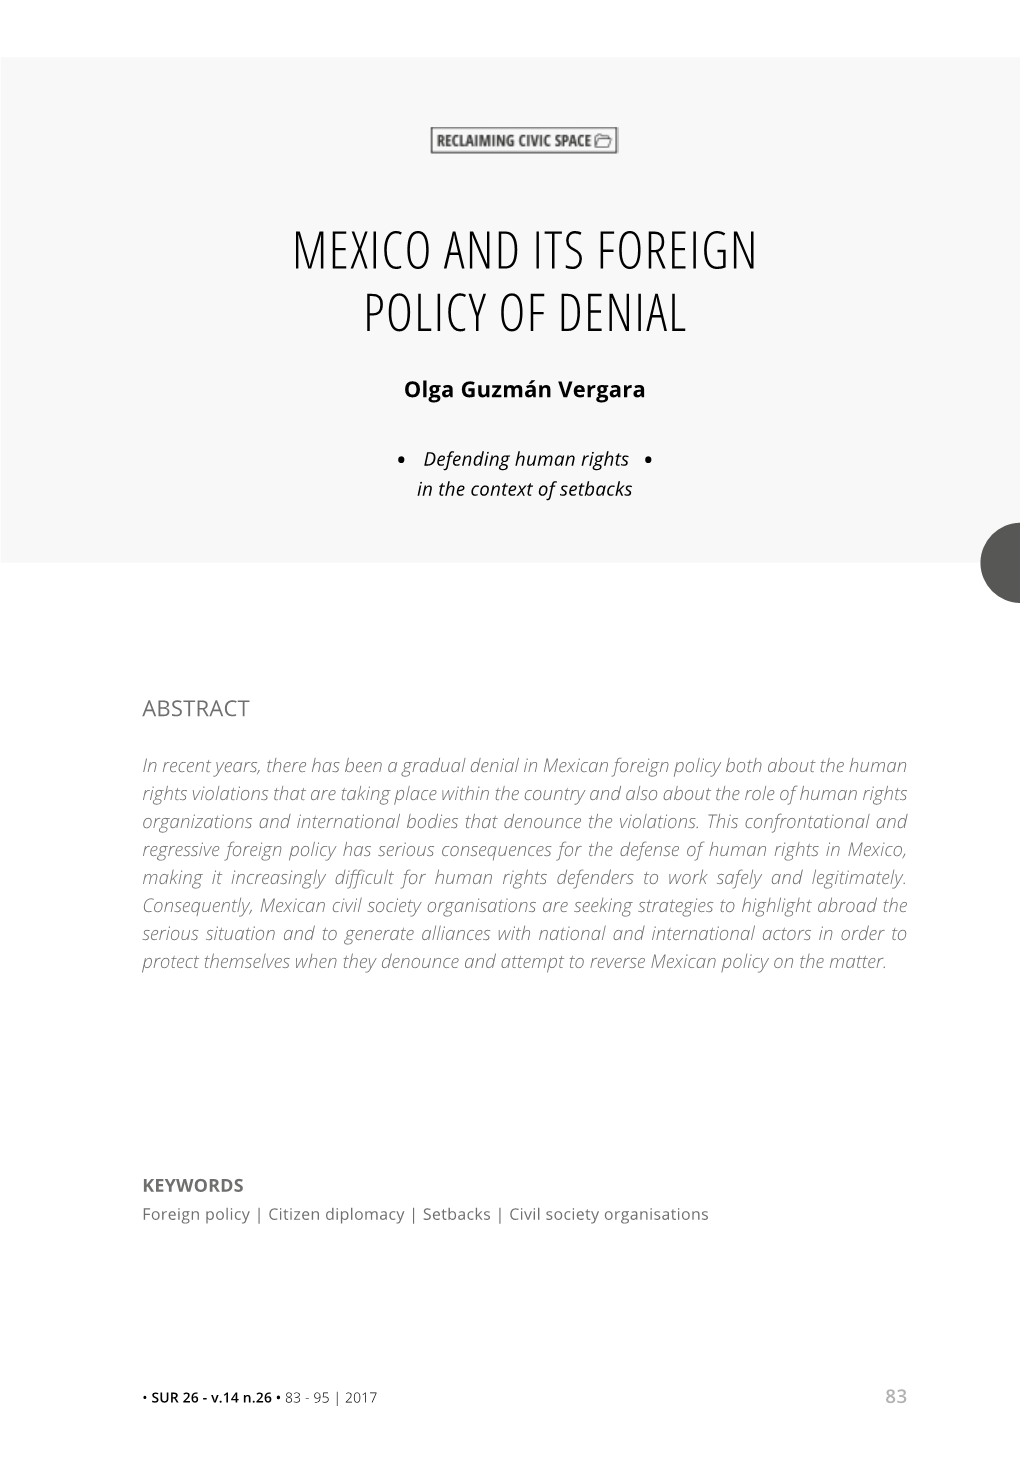 Mexico and Its Foreign Policy of Denial